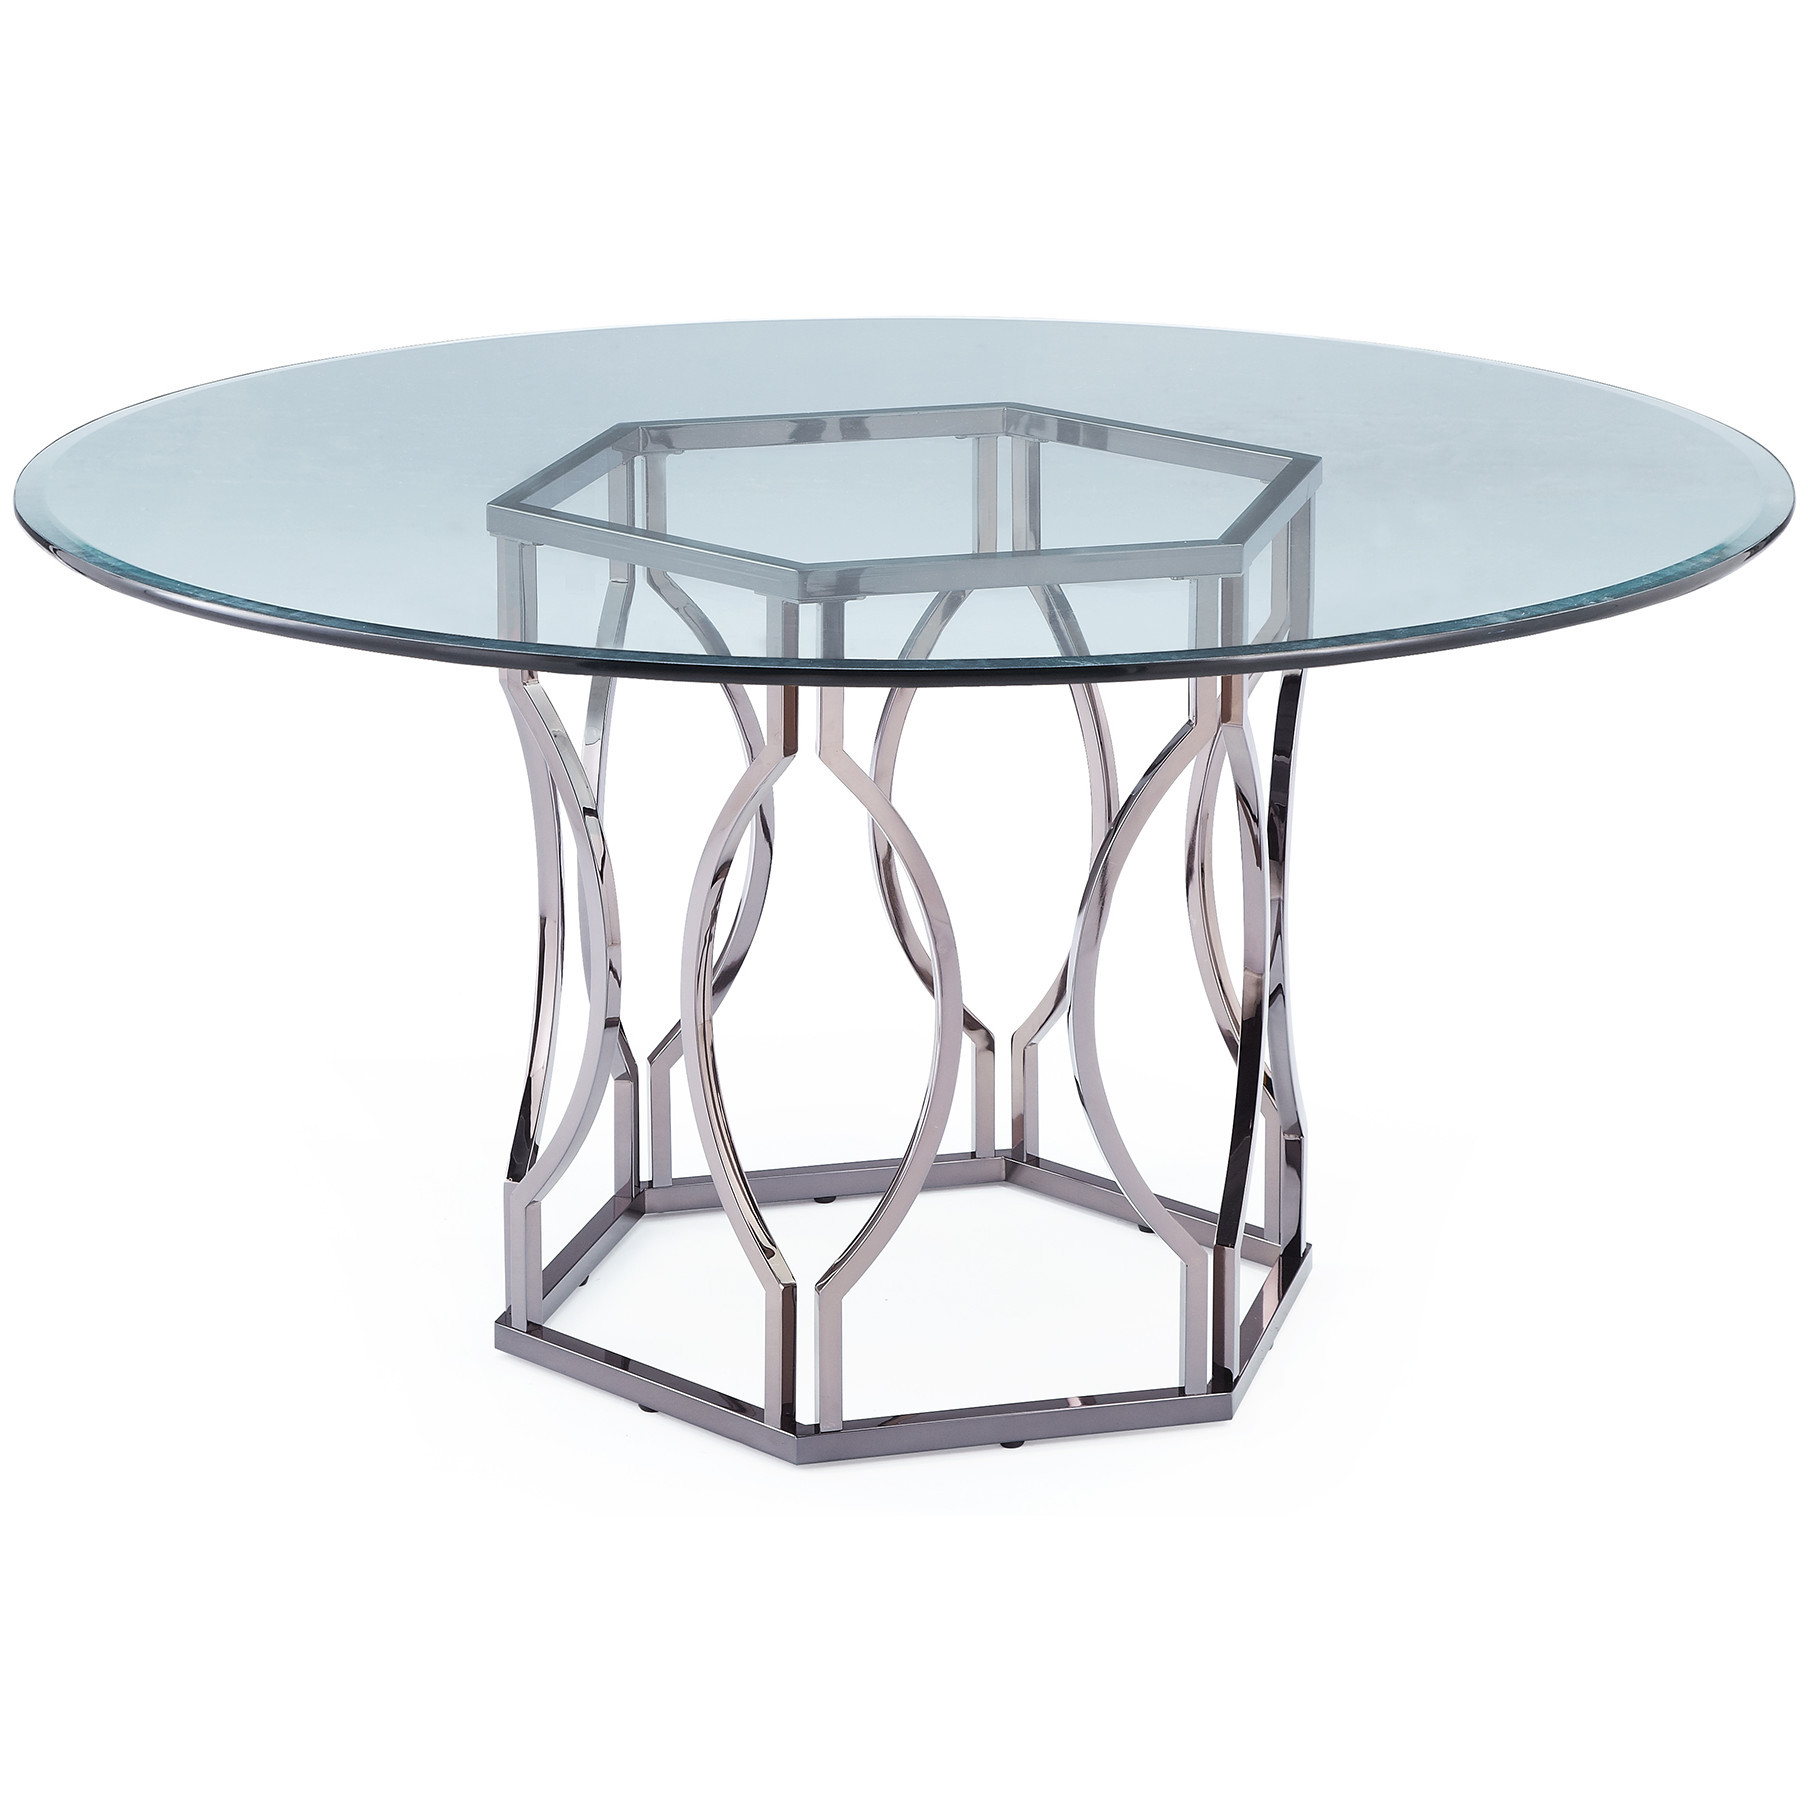 Best ideas about Glass Round Dining Table
. Save or Pin Mercer41 Viggo Round Glass Dining Table & Reviews Now.